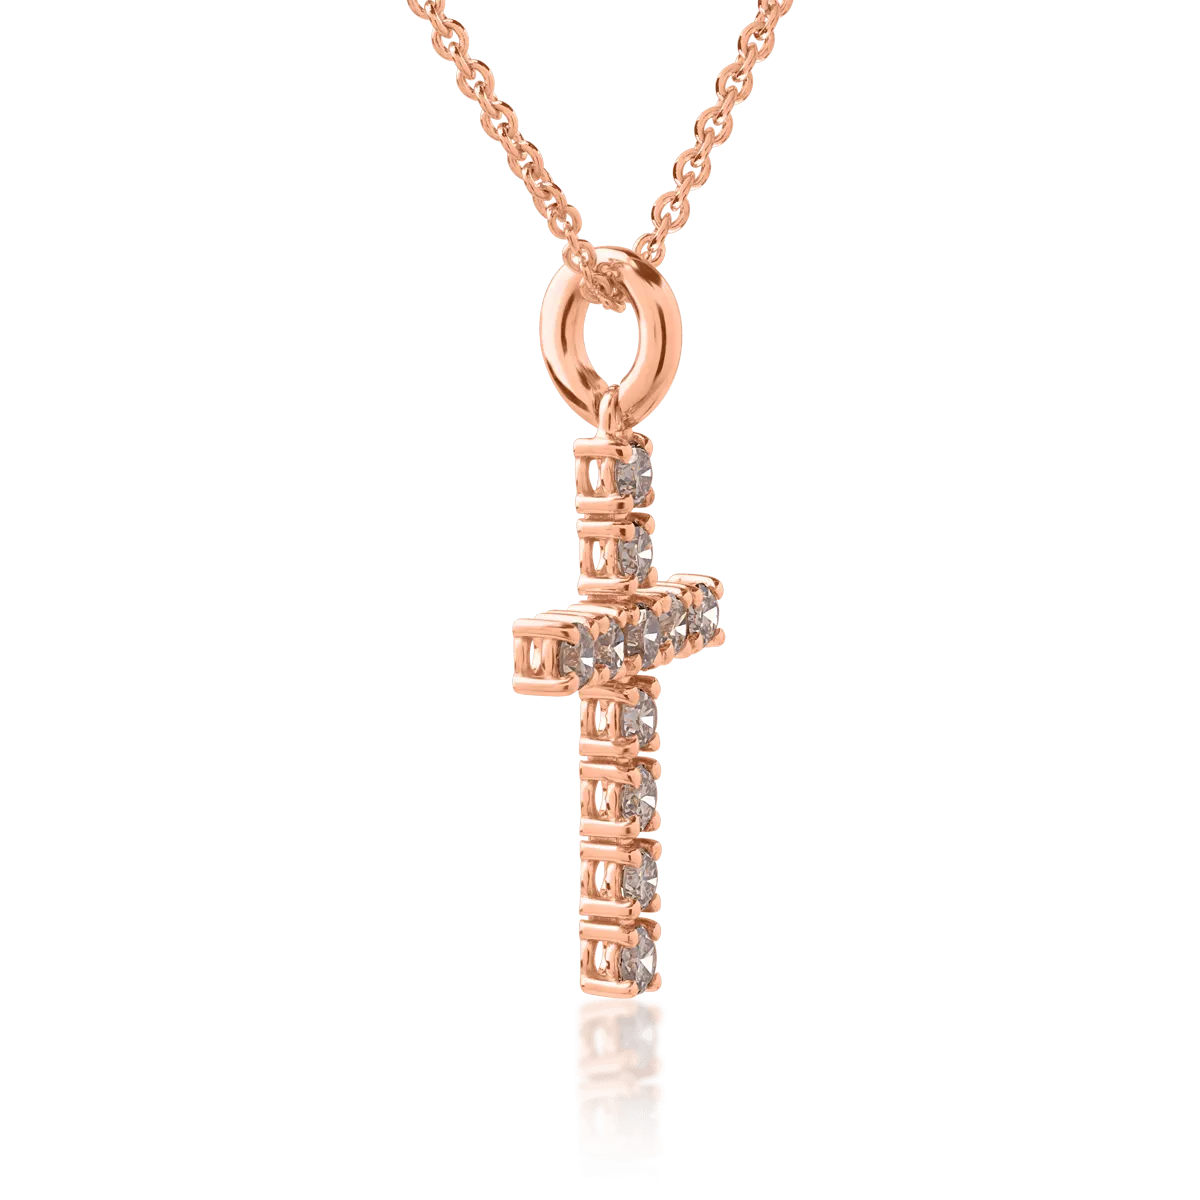 18K rose gold cross pendant chain with 0.5ct brown diamonds